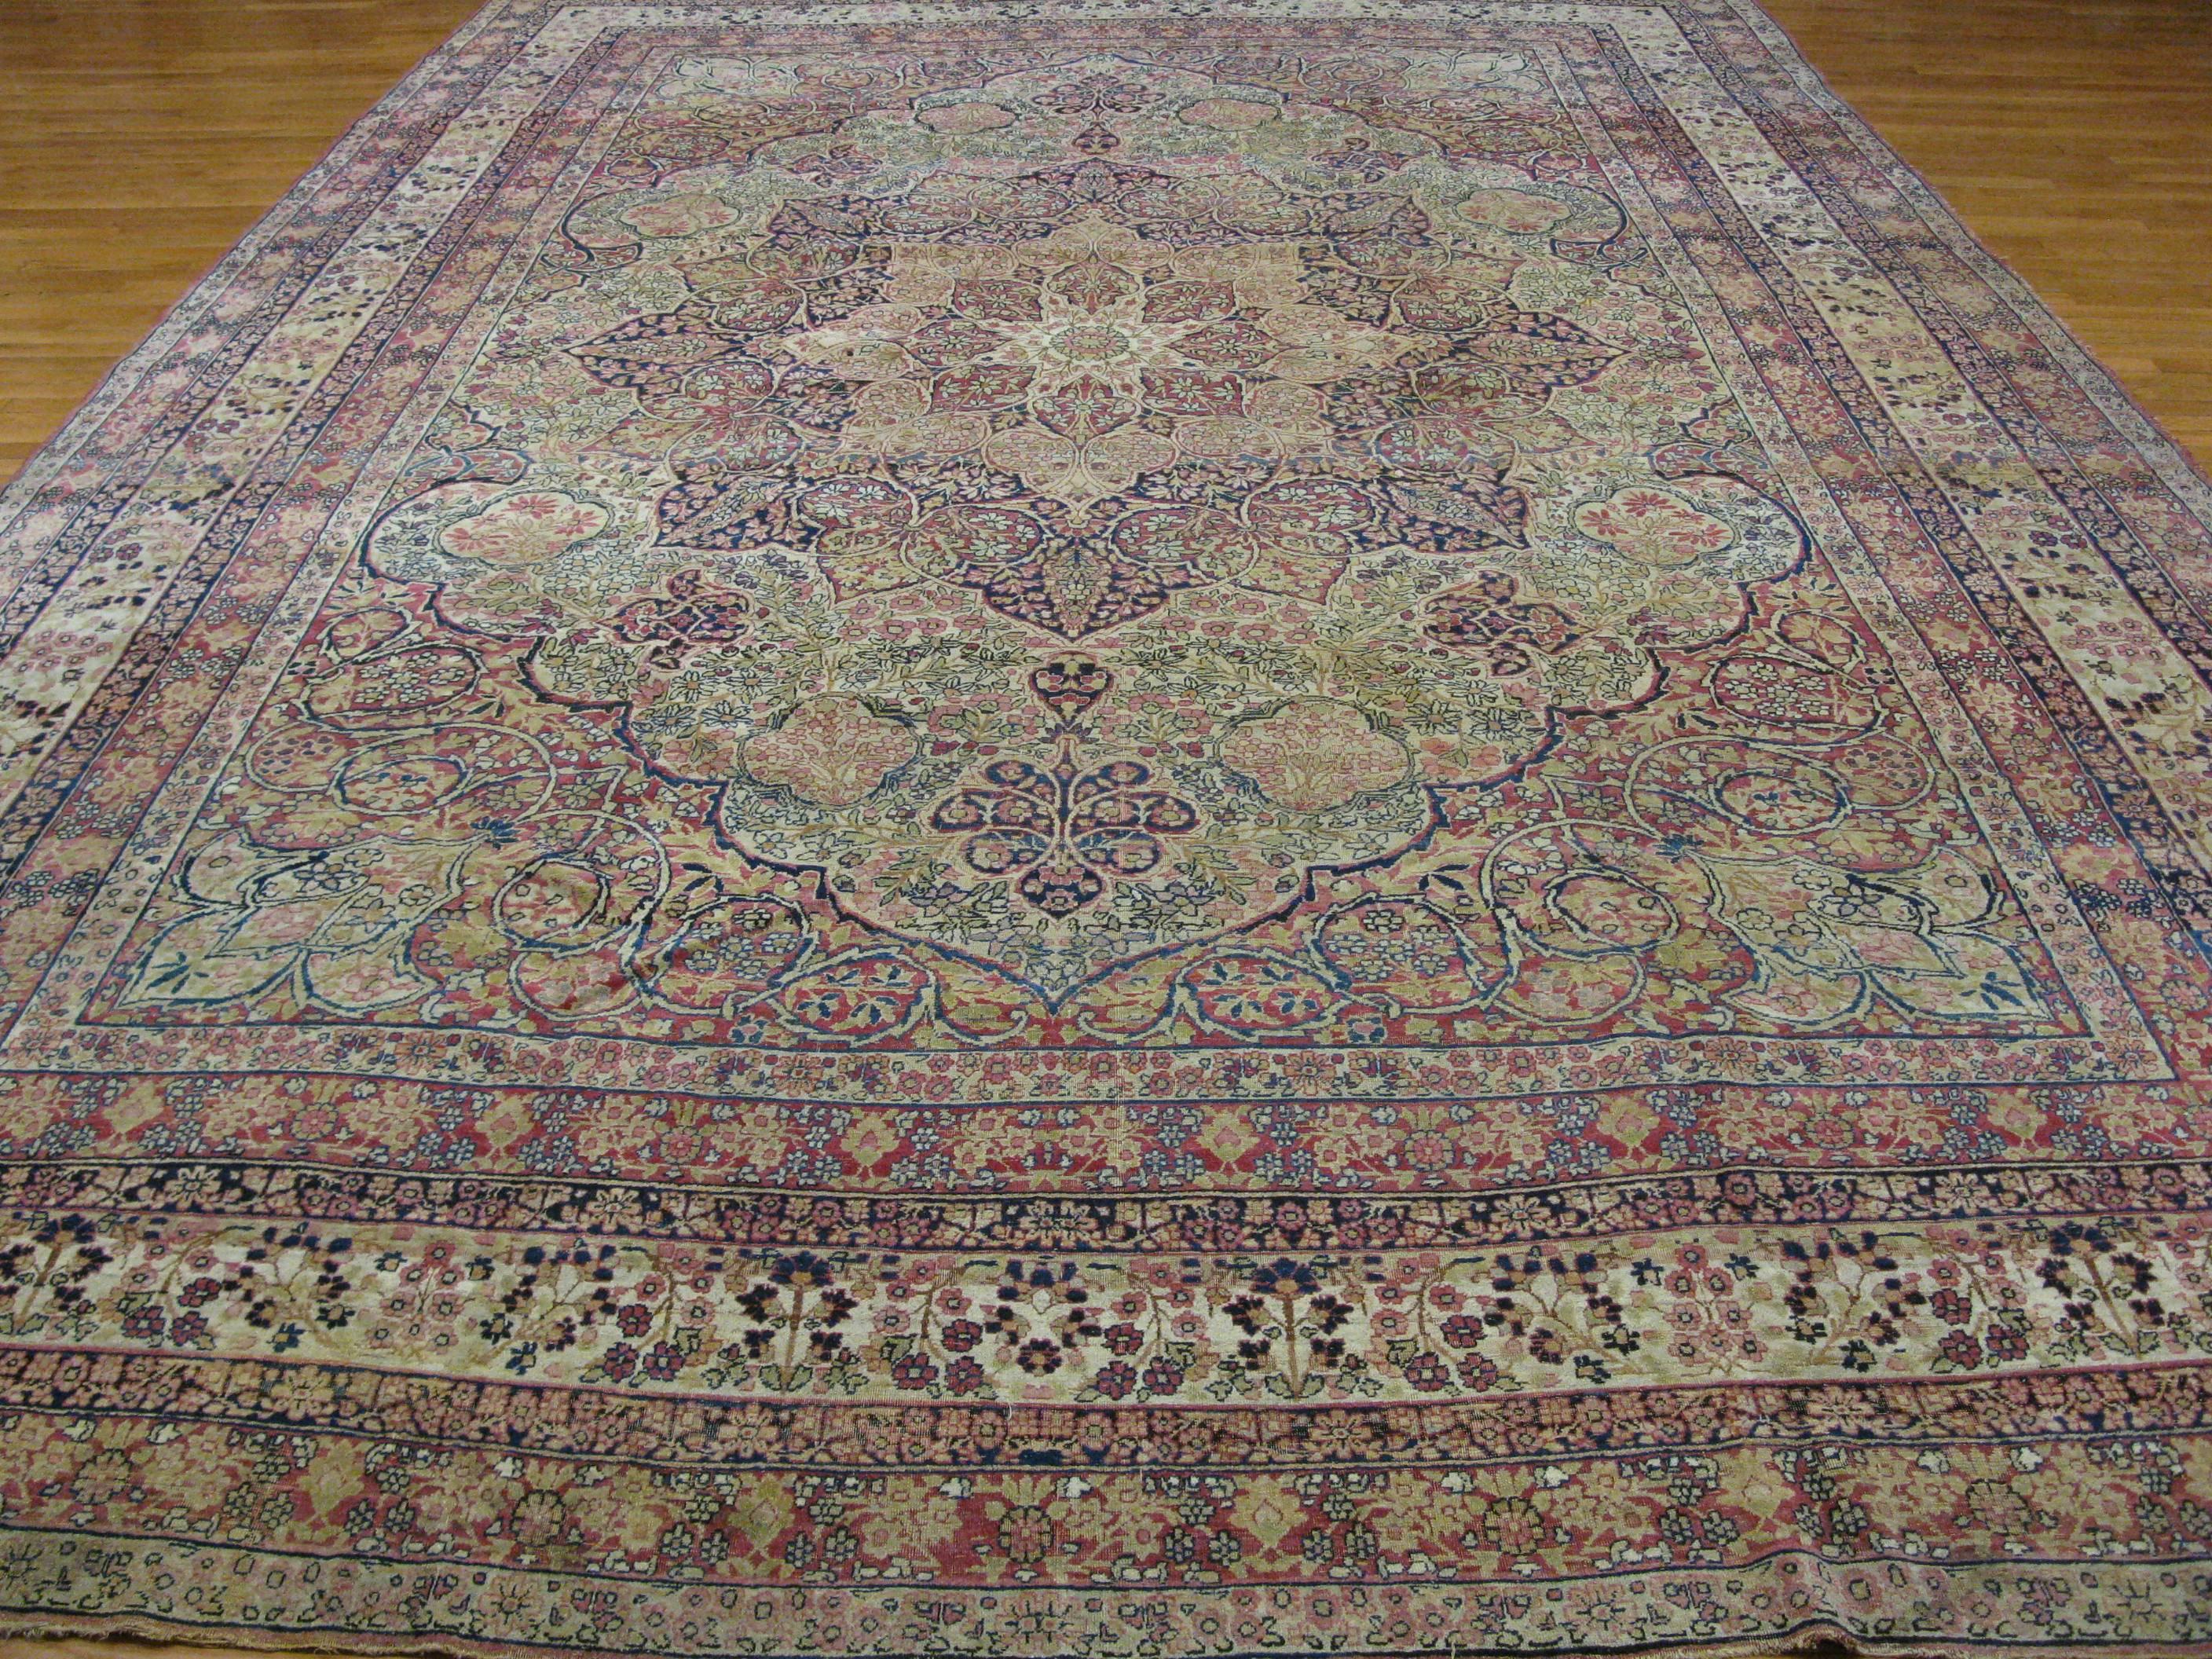 This is a beautiful large hand-knotted antique Persian Lavar Kerman. The rug has an intricate formal design made with all wool and natural dyes. The rug measures 10' 7'' x 16' 2''.